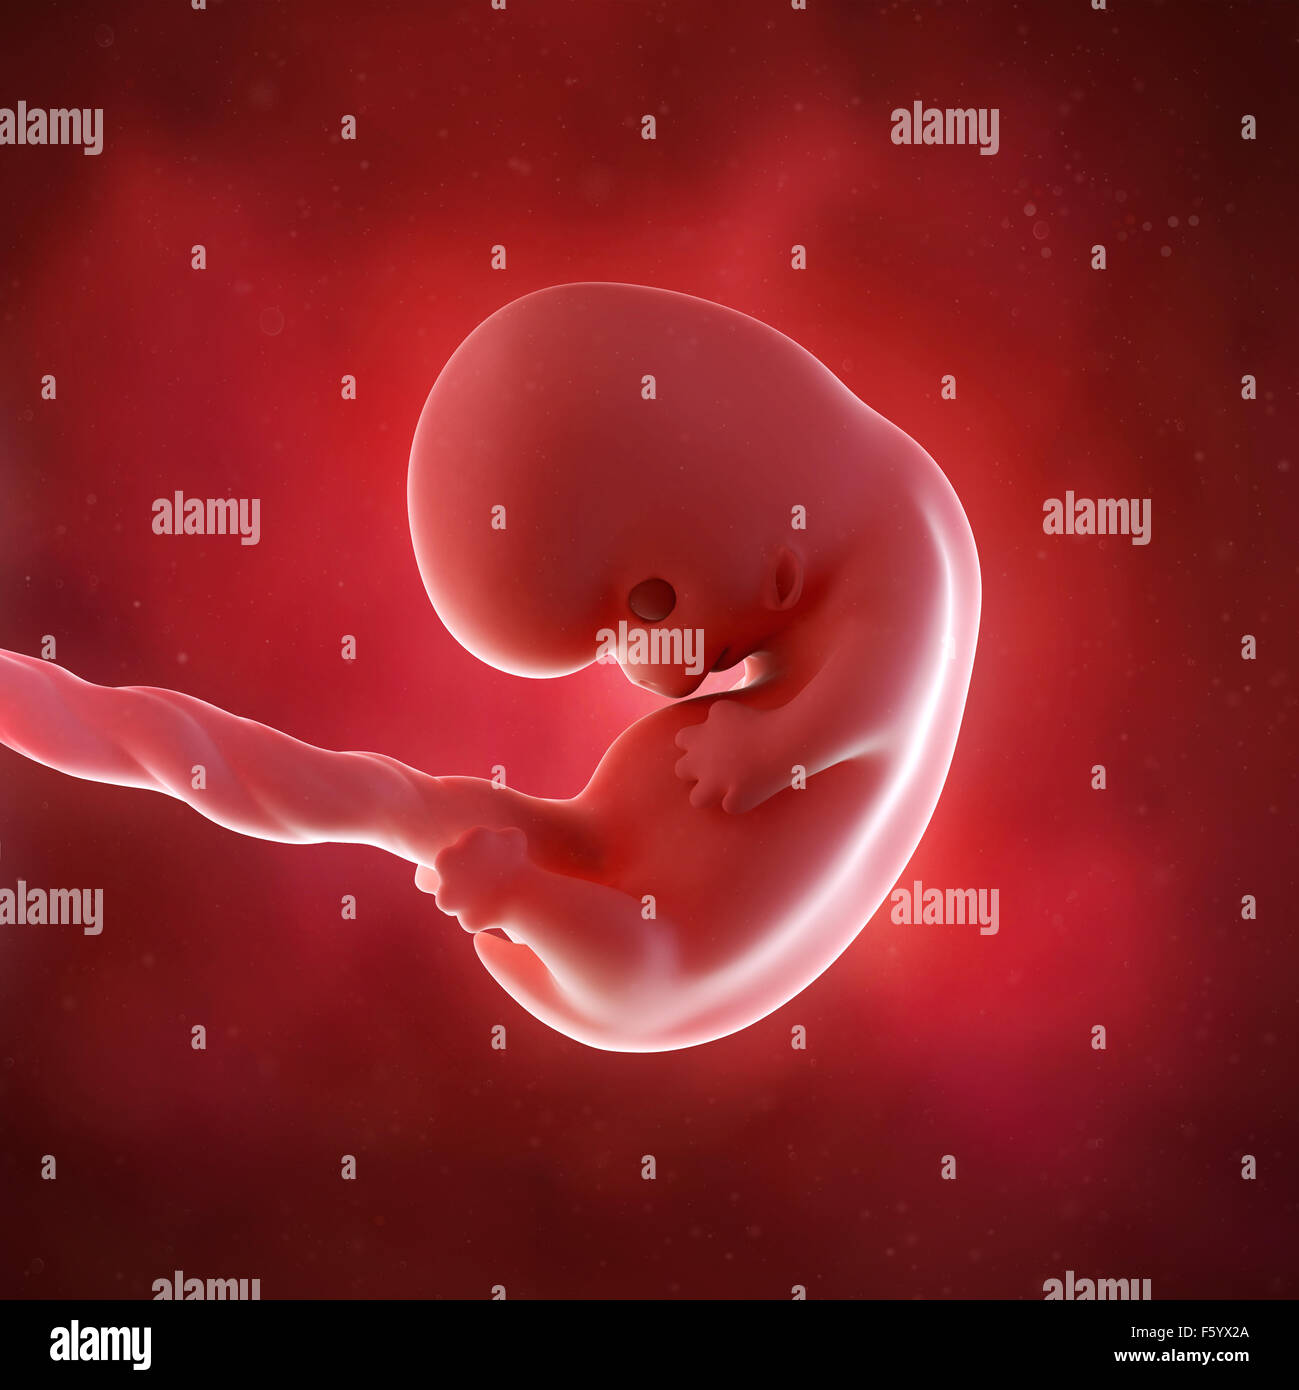 medical accurate 3d illustration of a fetus week 8 Stock Photo